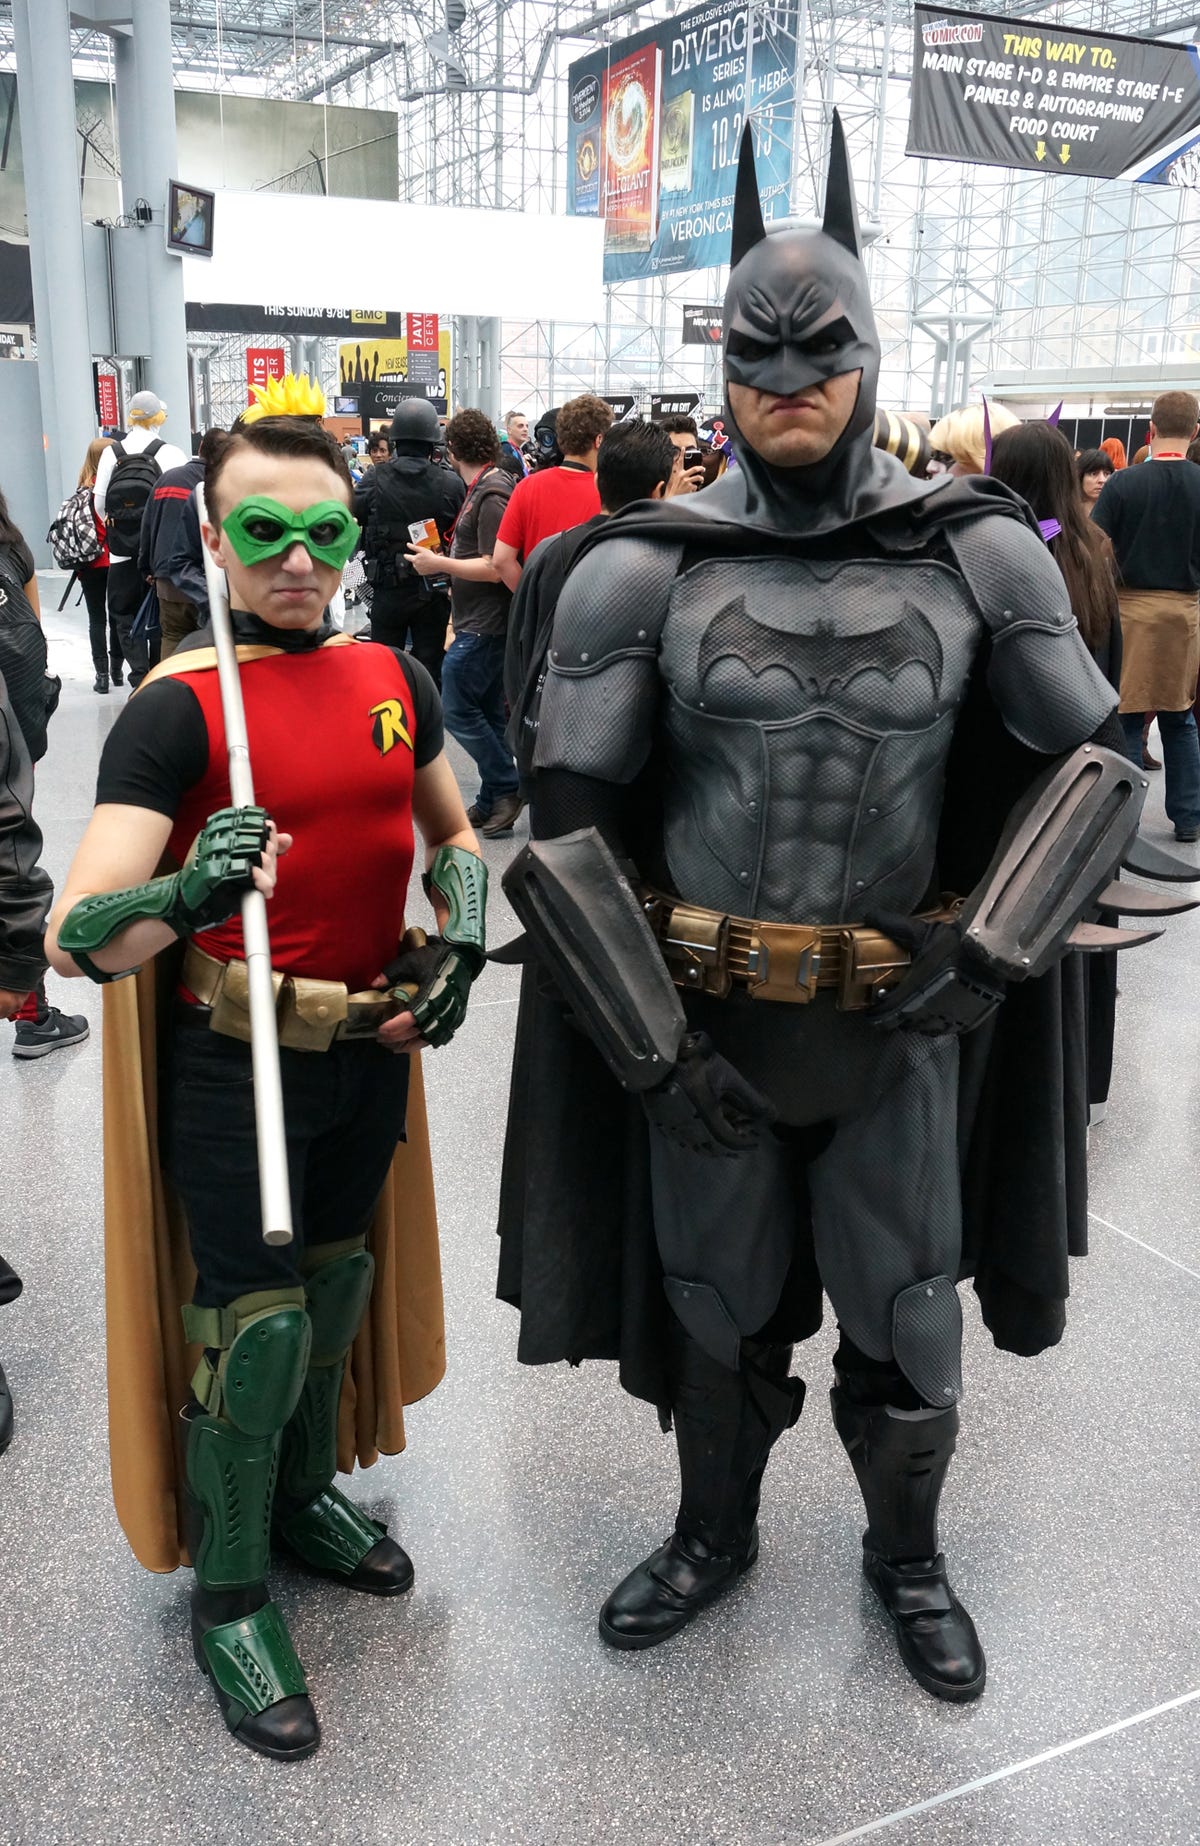 Les costumes du Net en vrac !!! - Page 30 Batman-characters-are-always-popular-heres-the-dark-knight-and-the-boy-wonder-robin